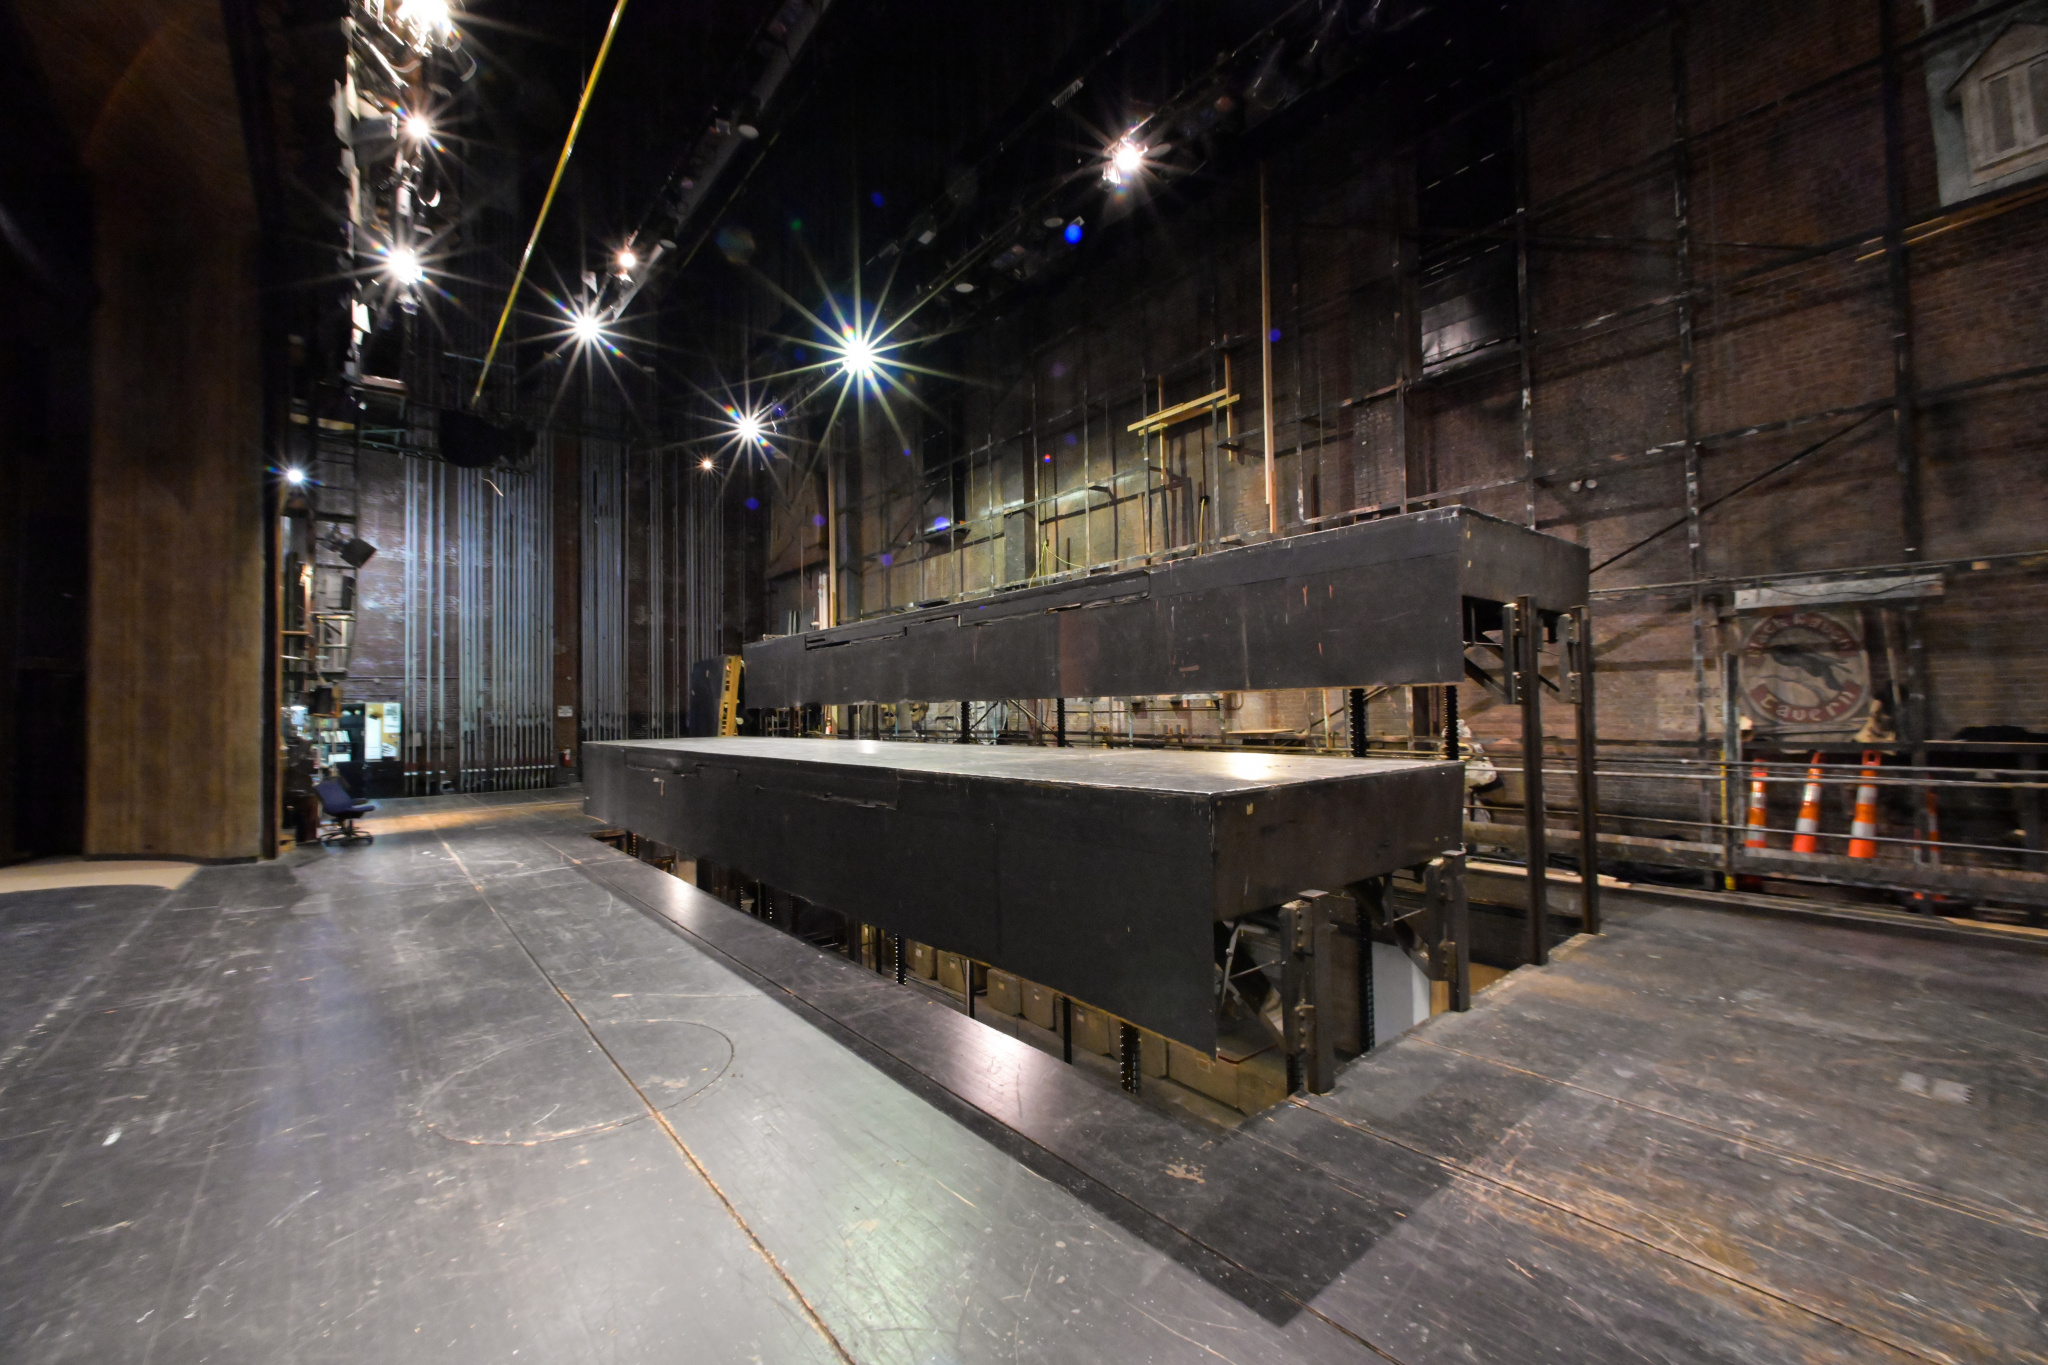 Stage lifts can be used to raise or lower performers, sets or props during a performance (Photo by Derek Eckenroth)